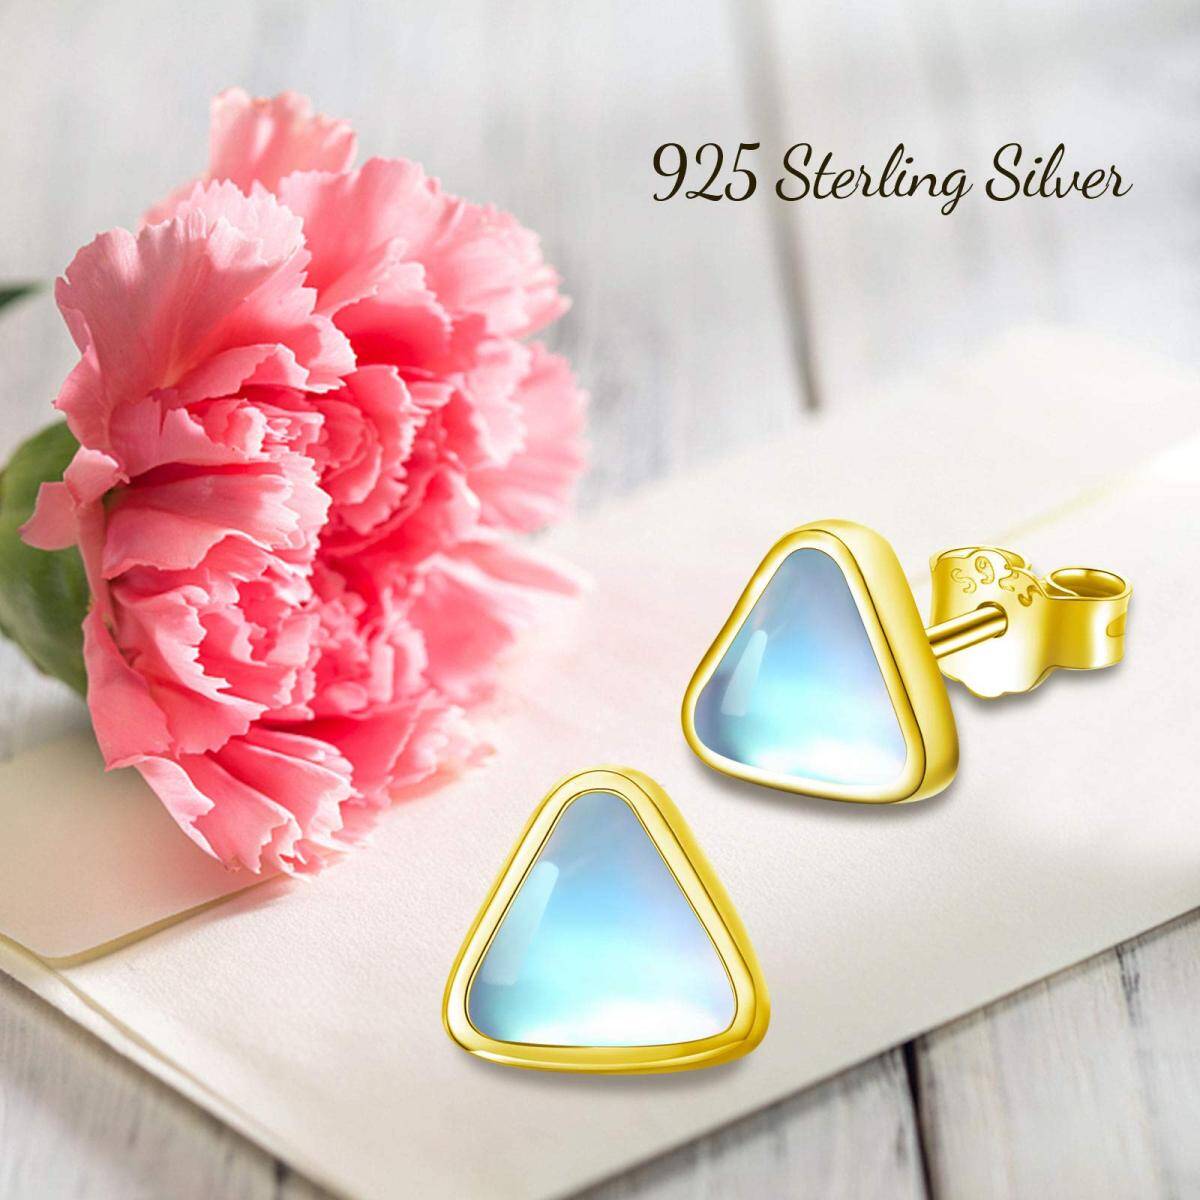 Sterling Silver with Yellow Gold Plated Moonstone Triangle Stud Earrings-5